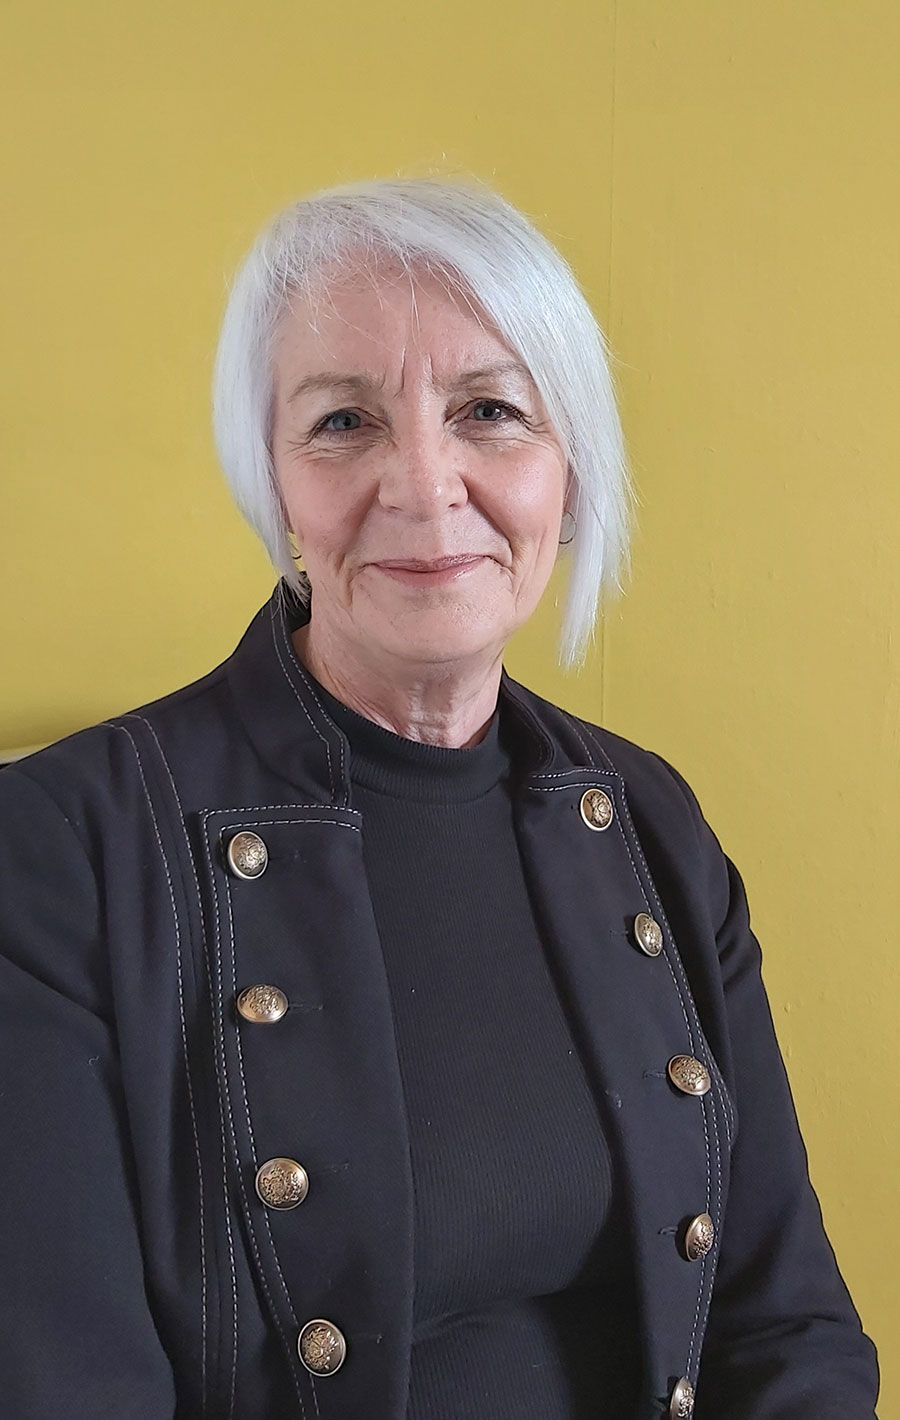 A woman with short grey hair, wearing a blue jacket with buttons.